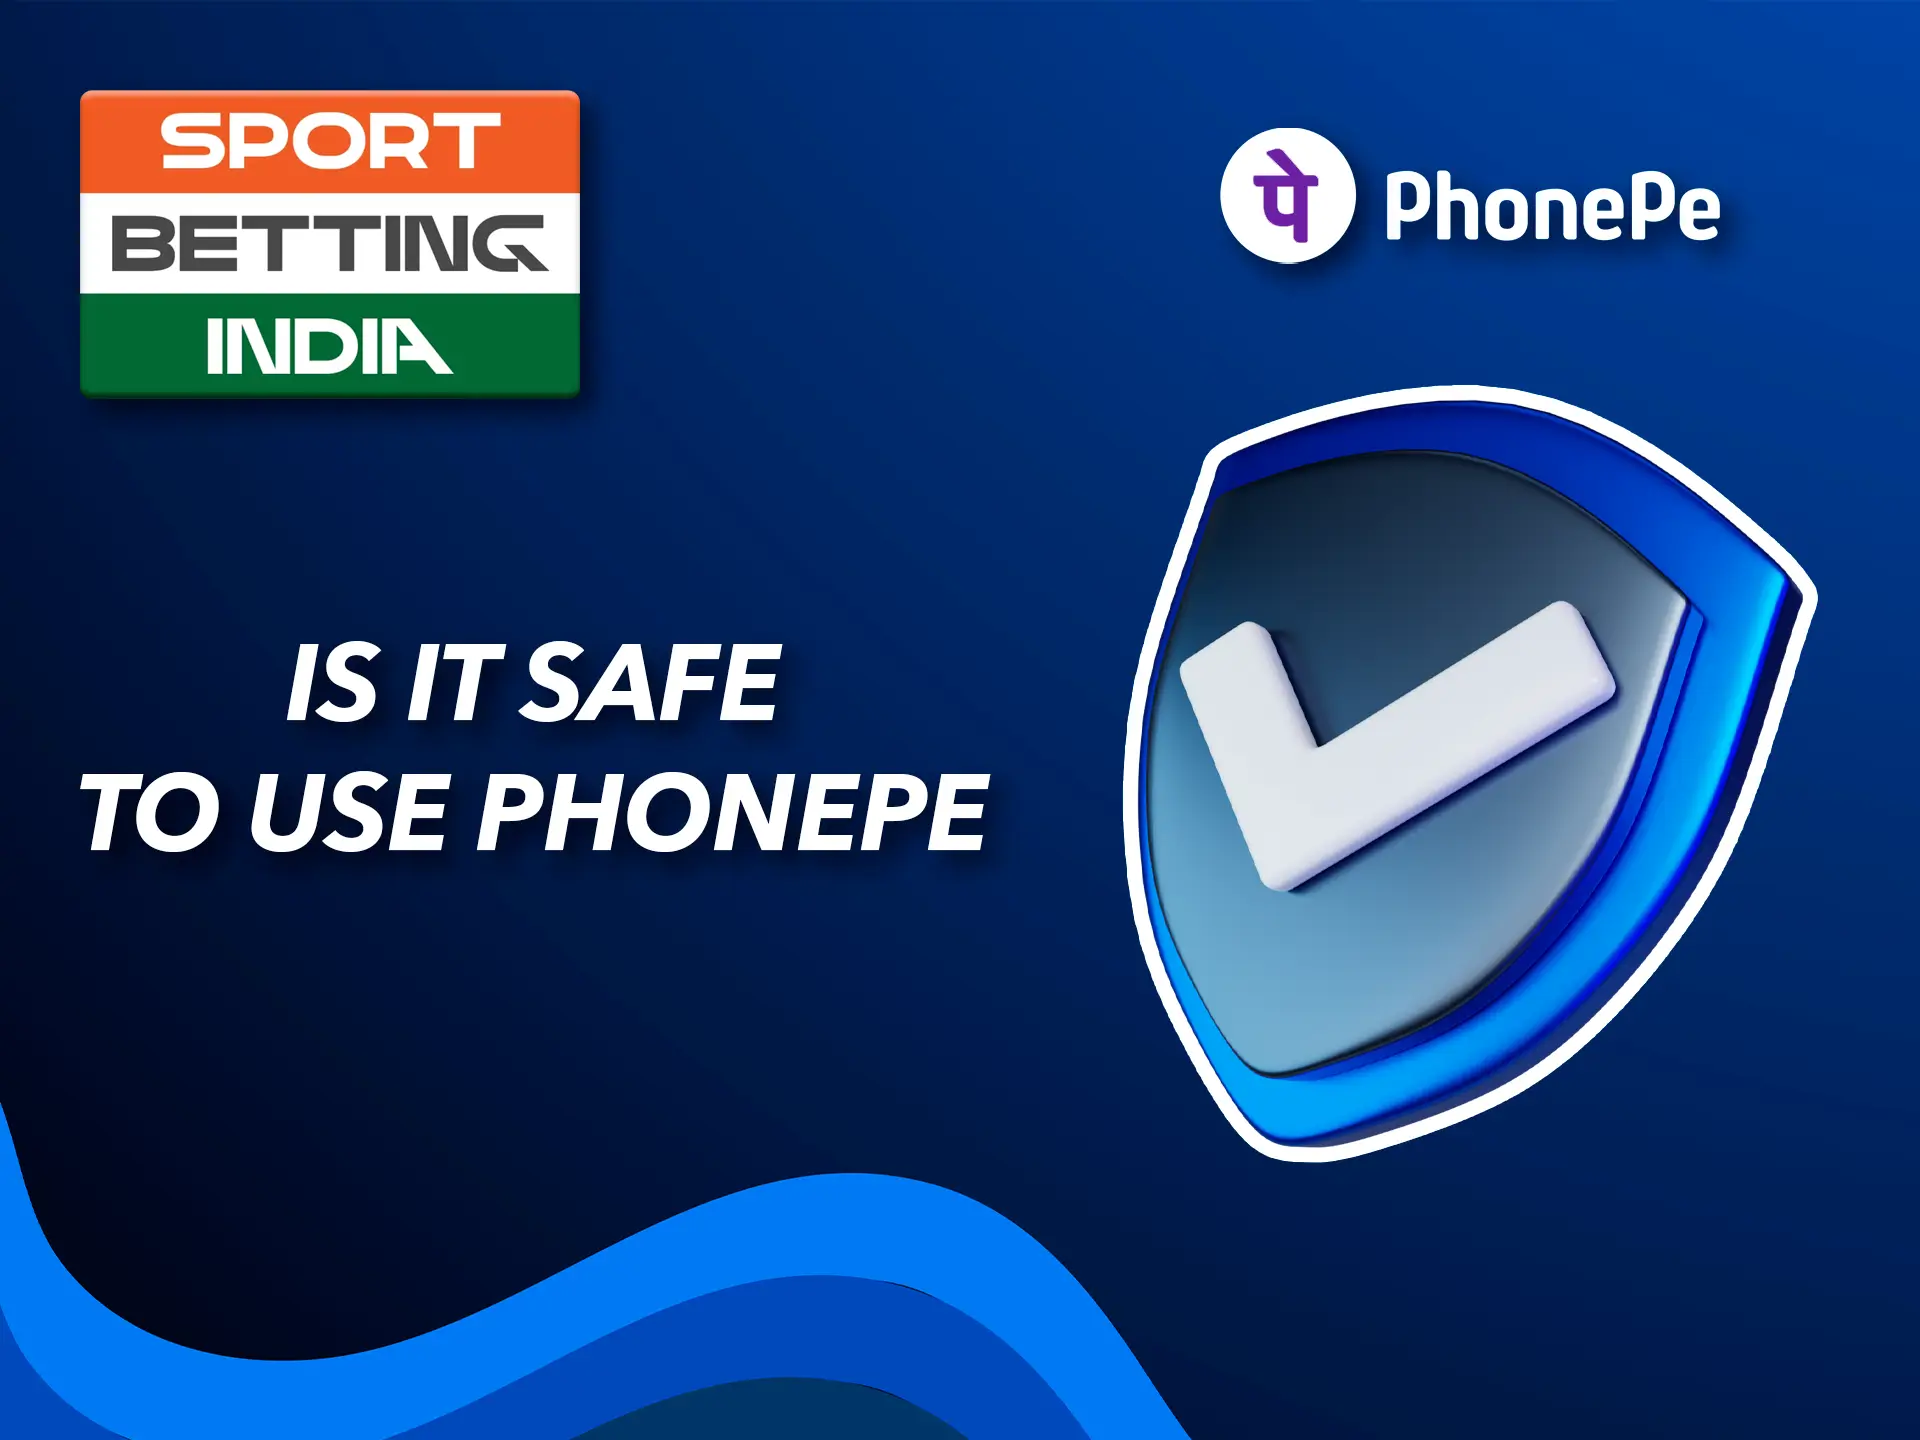 Use one of India's safest and most technologically advanced payment systems, PhonePe.